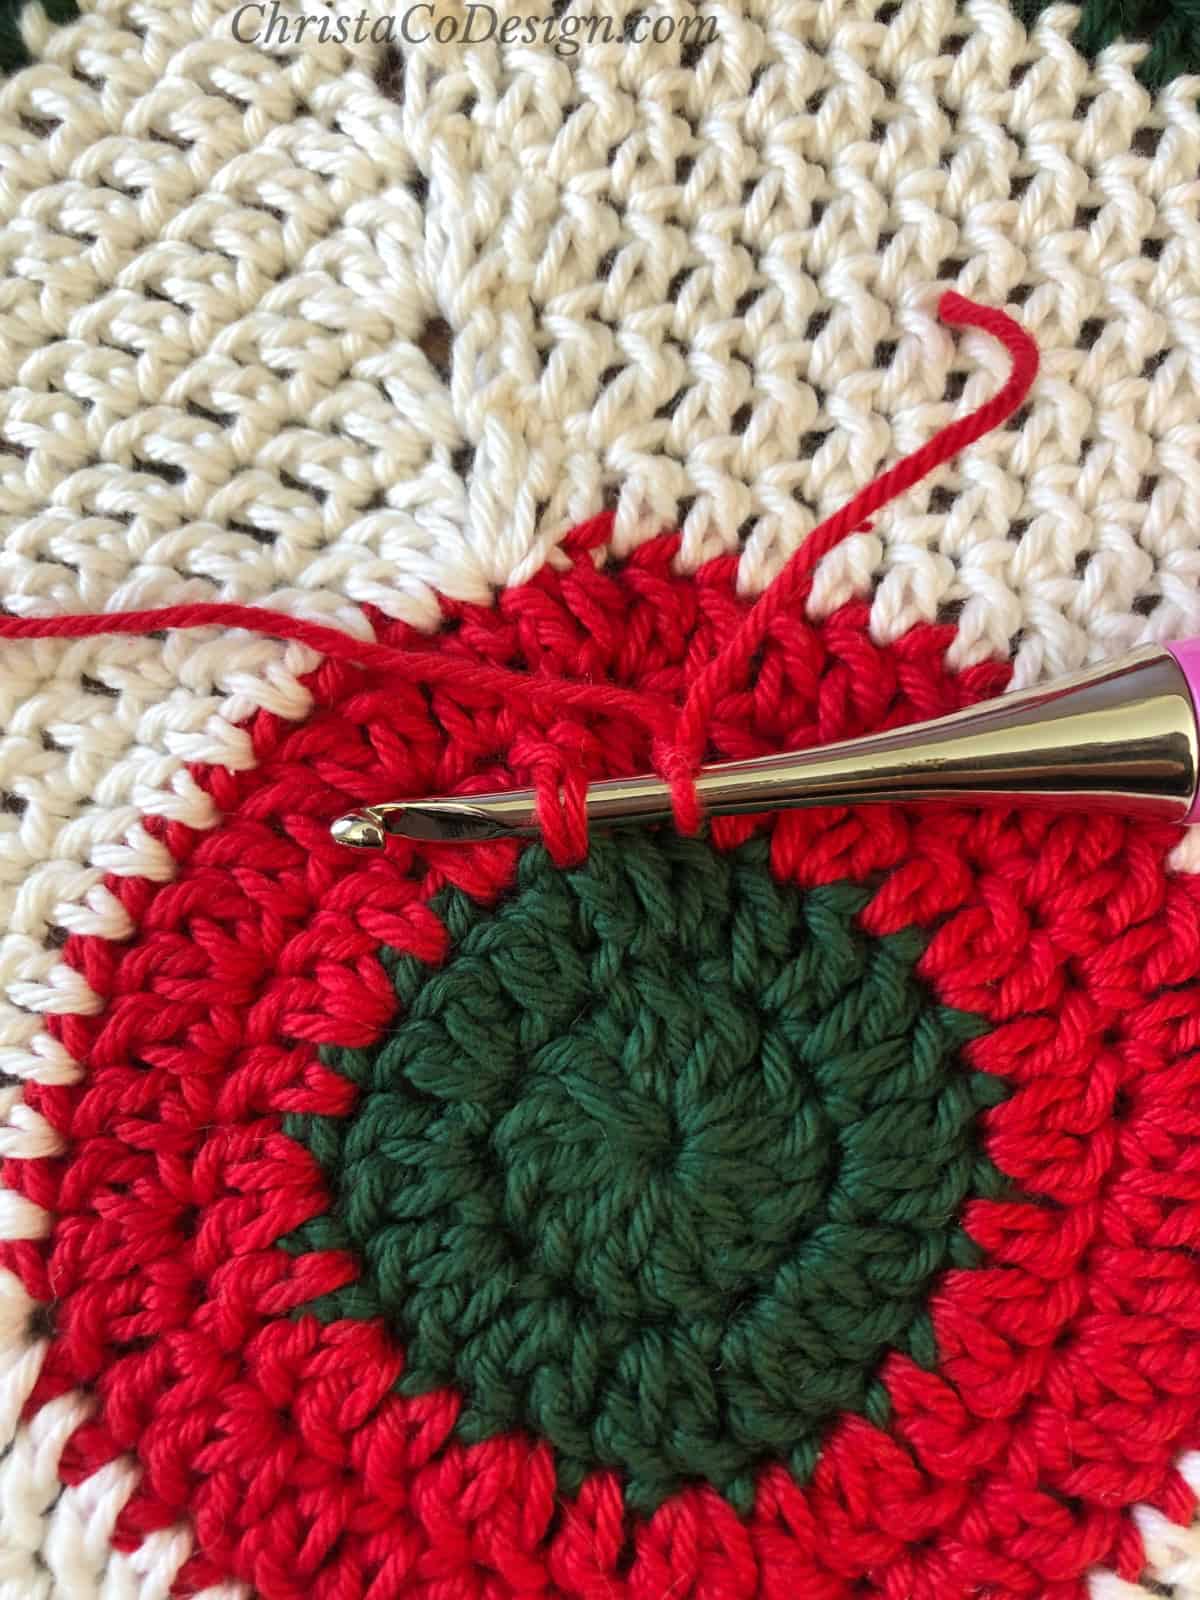 Crochet hook inserted on surface of granny square.